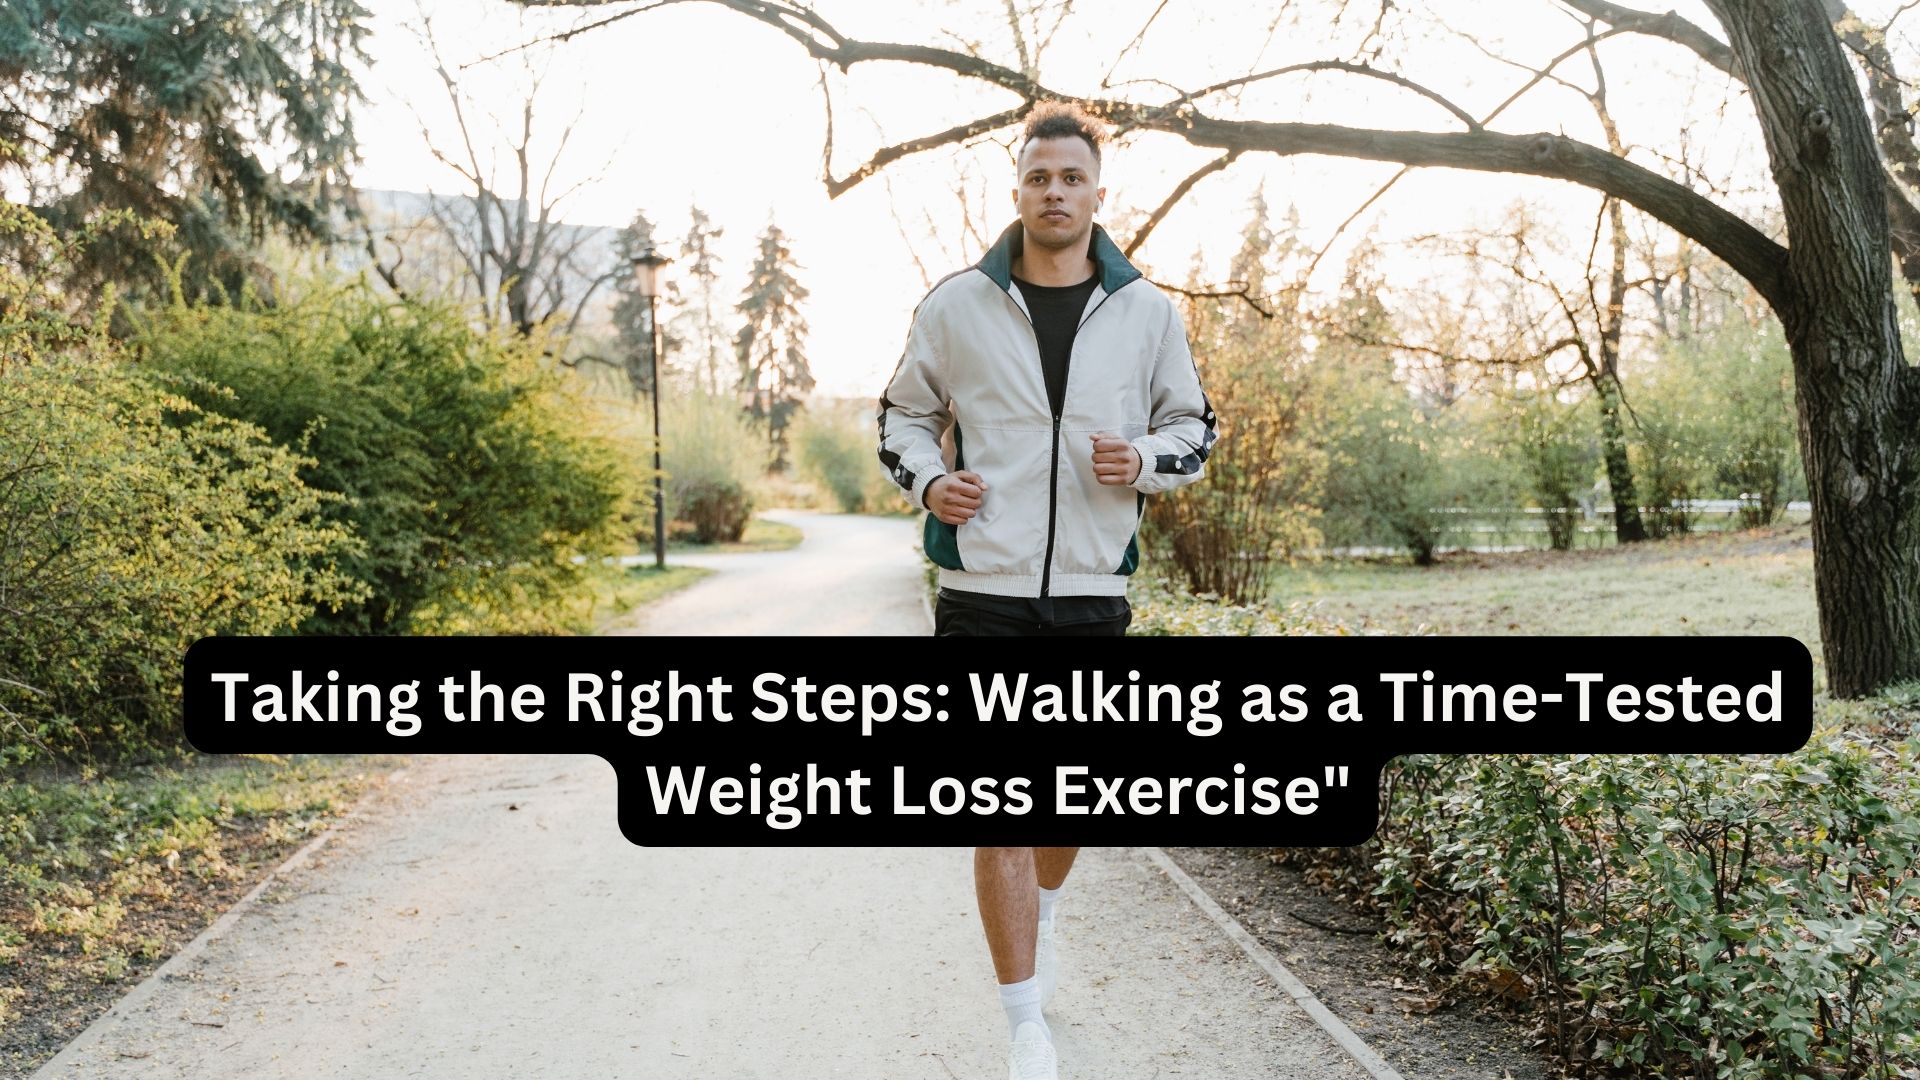 Taking the Right Steps: Walking as a Time-Tested Weight Loss Exercise"